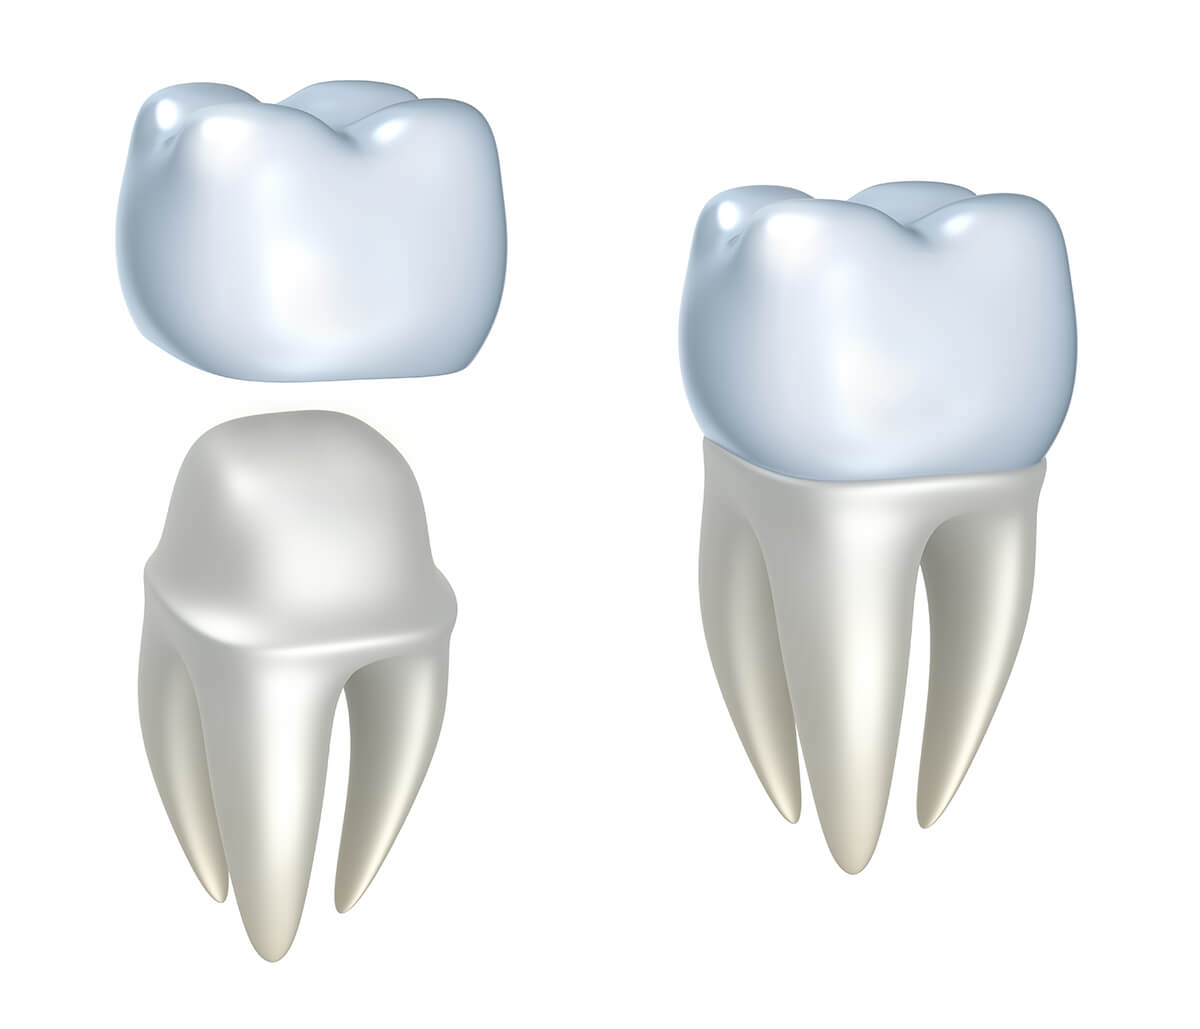 Reasons Dental Crowns Are Needed to Restore your Oral Health and Smile